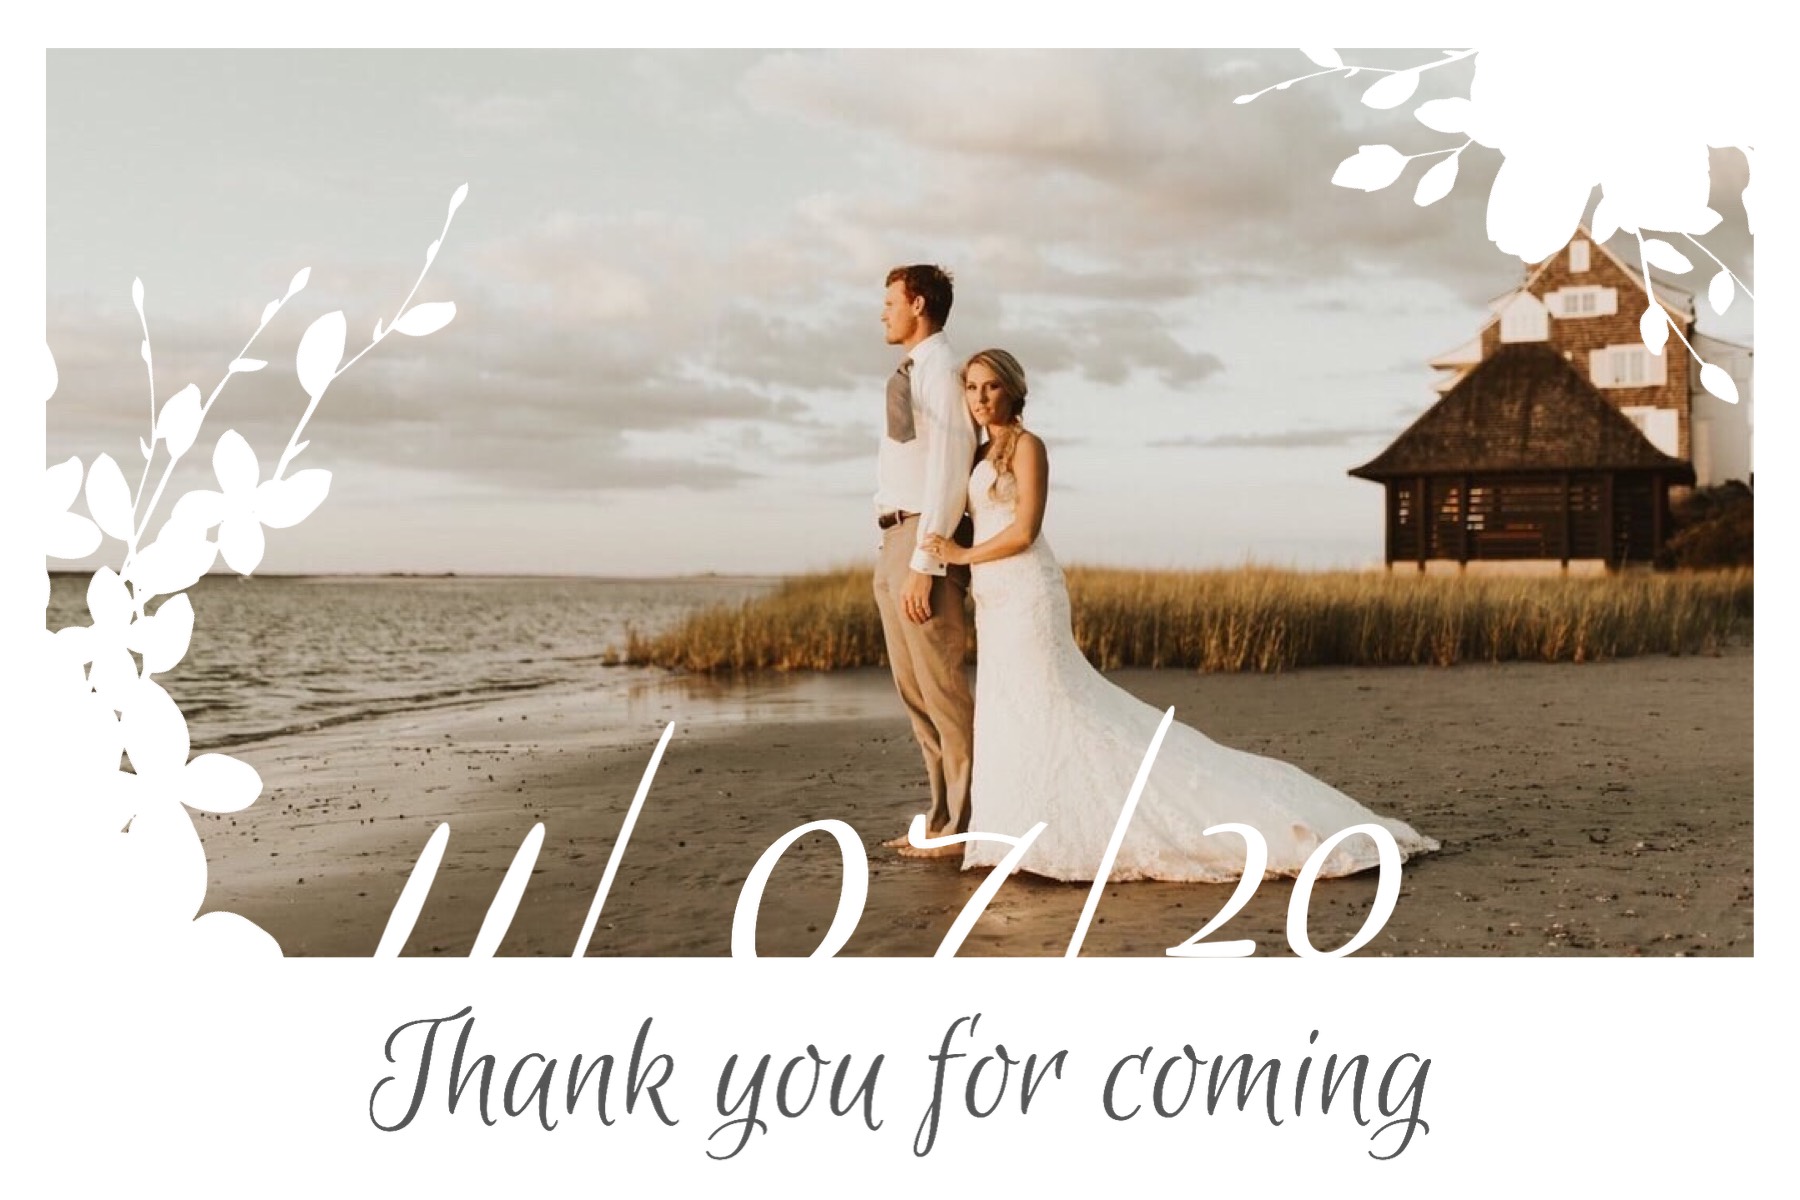 A Photo Of A Couple On The Beach With The Words Thank You Template